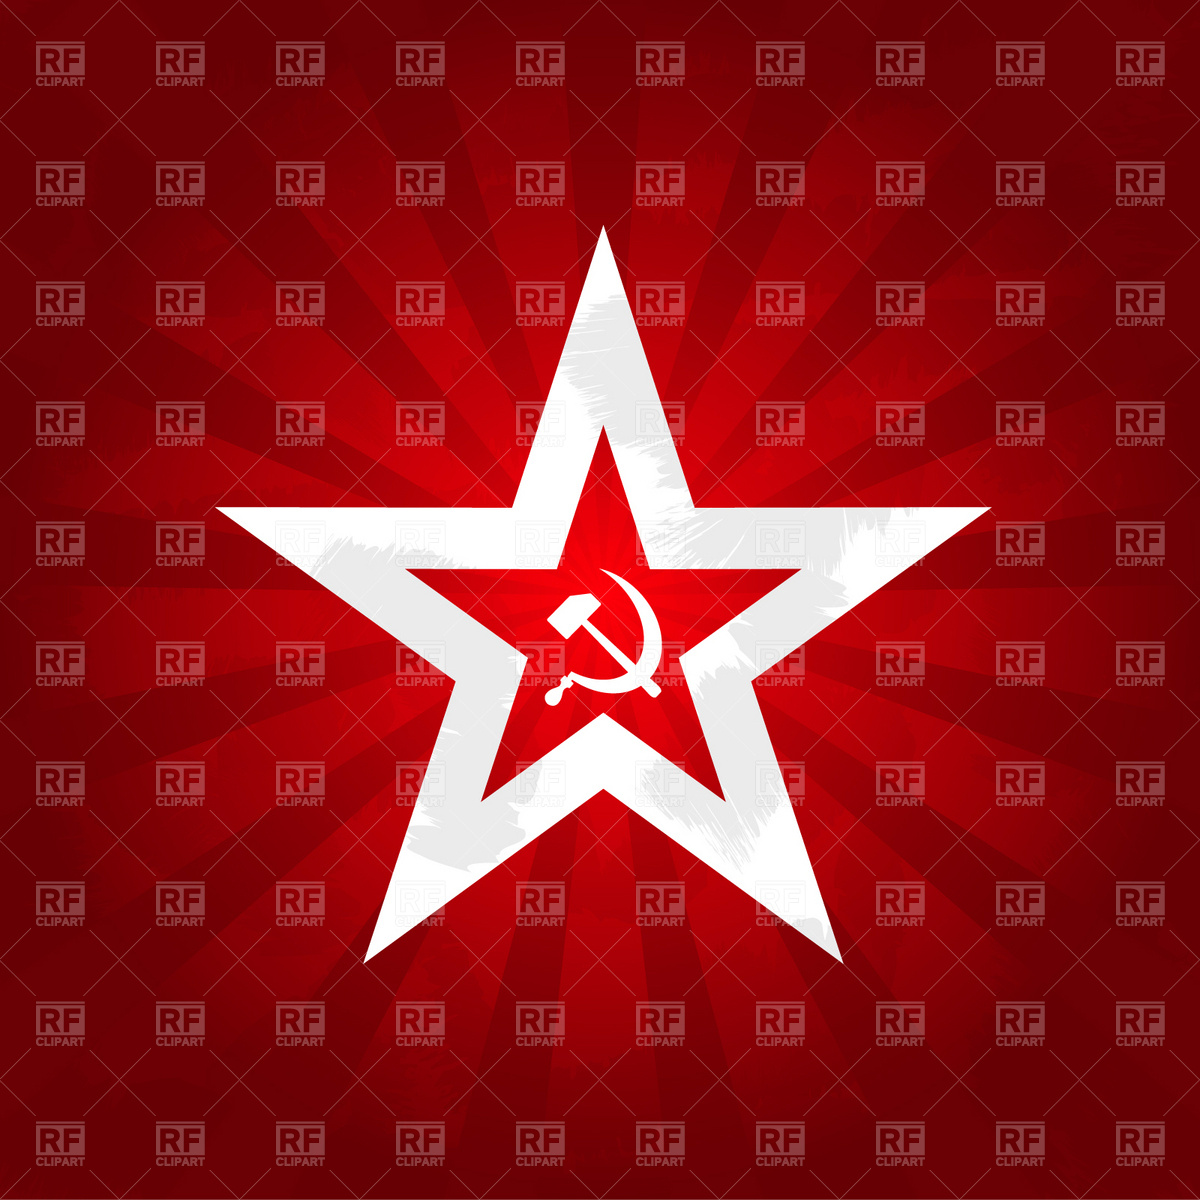 Russian Hammer and Sickle Symbol